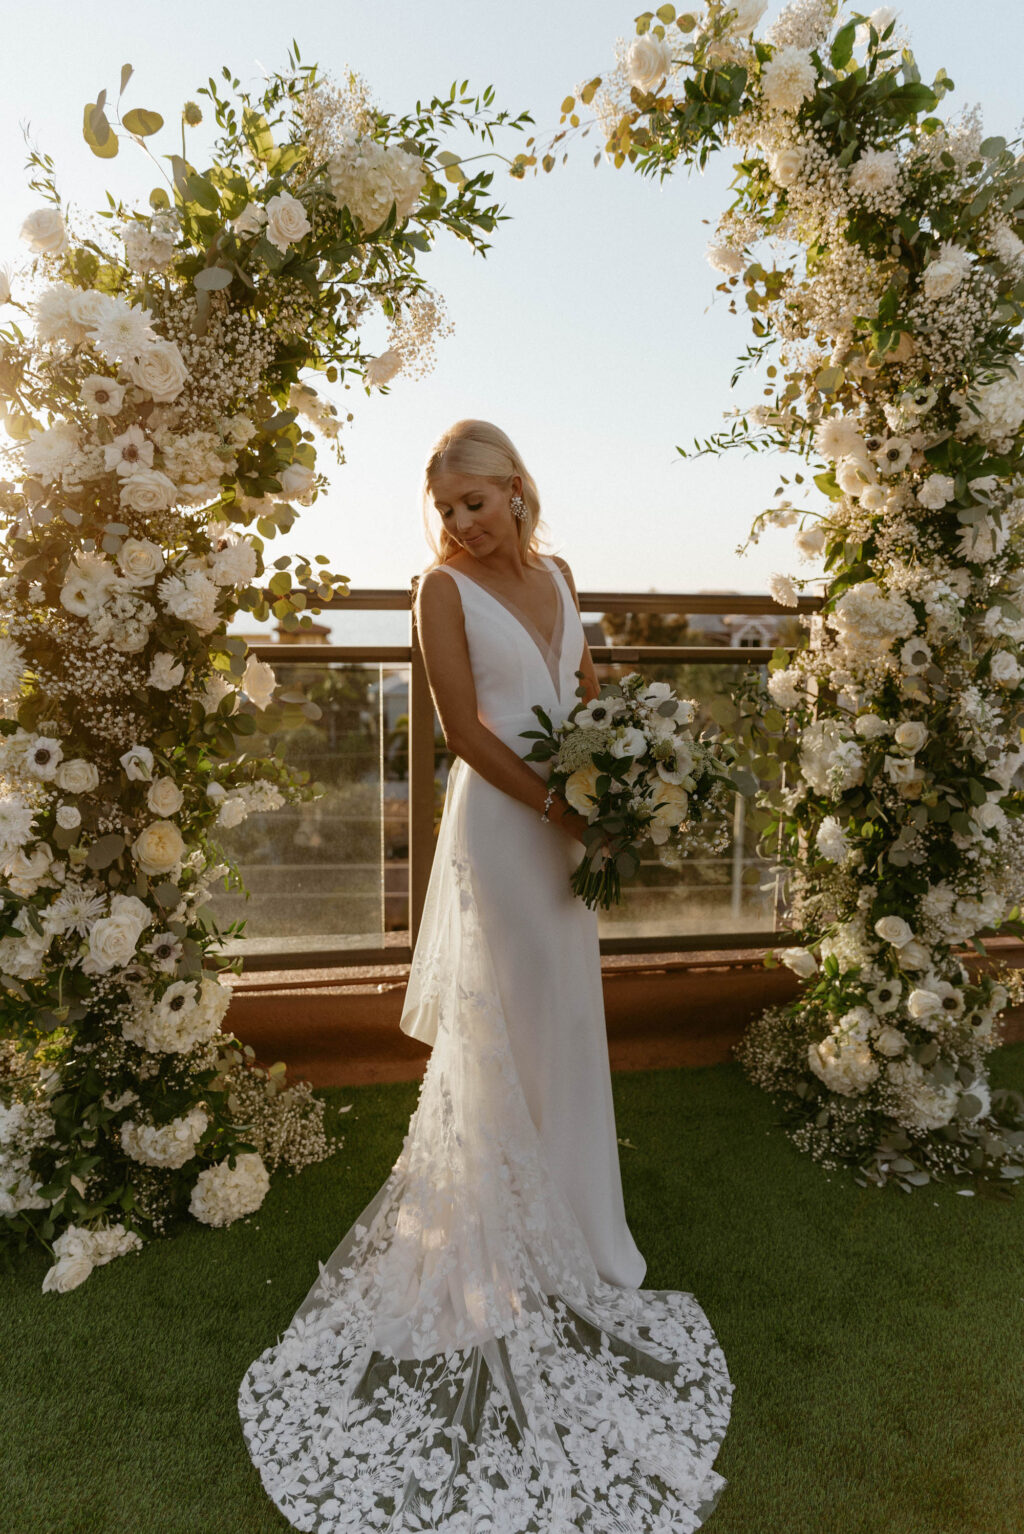 Bride in Illusion Lace Back Wedding Dress Golden Hour Wedding Portrait in Front of Floral Ceremony Arch Inspiration and Beachy White and Cream Bridal Bouquet with Greenery Details | St. Pete Beach Lemon Drops Weddings & Events